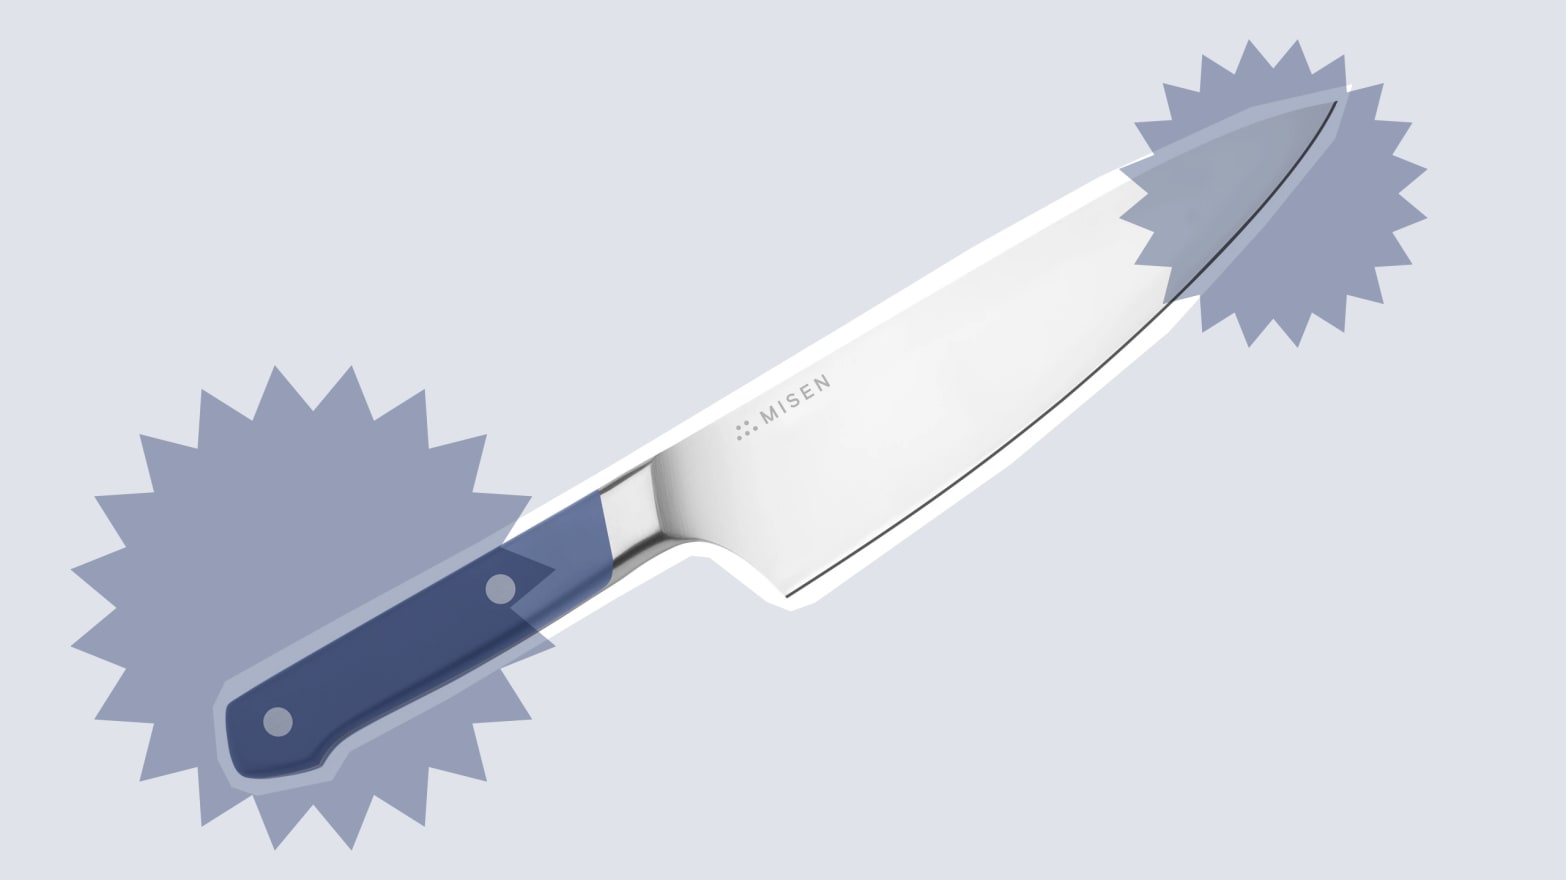 Best Chef's Knife for Small Hands is from Misen